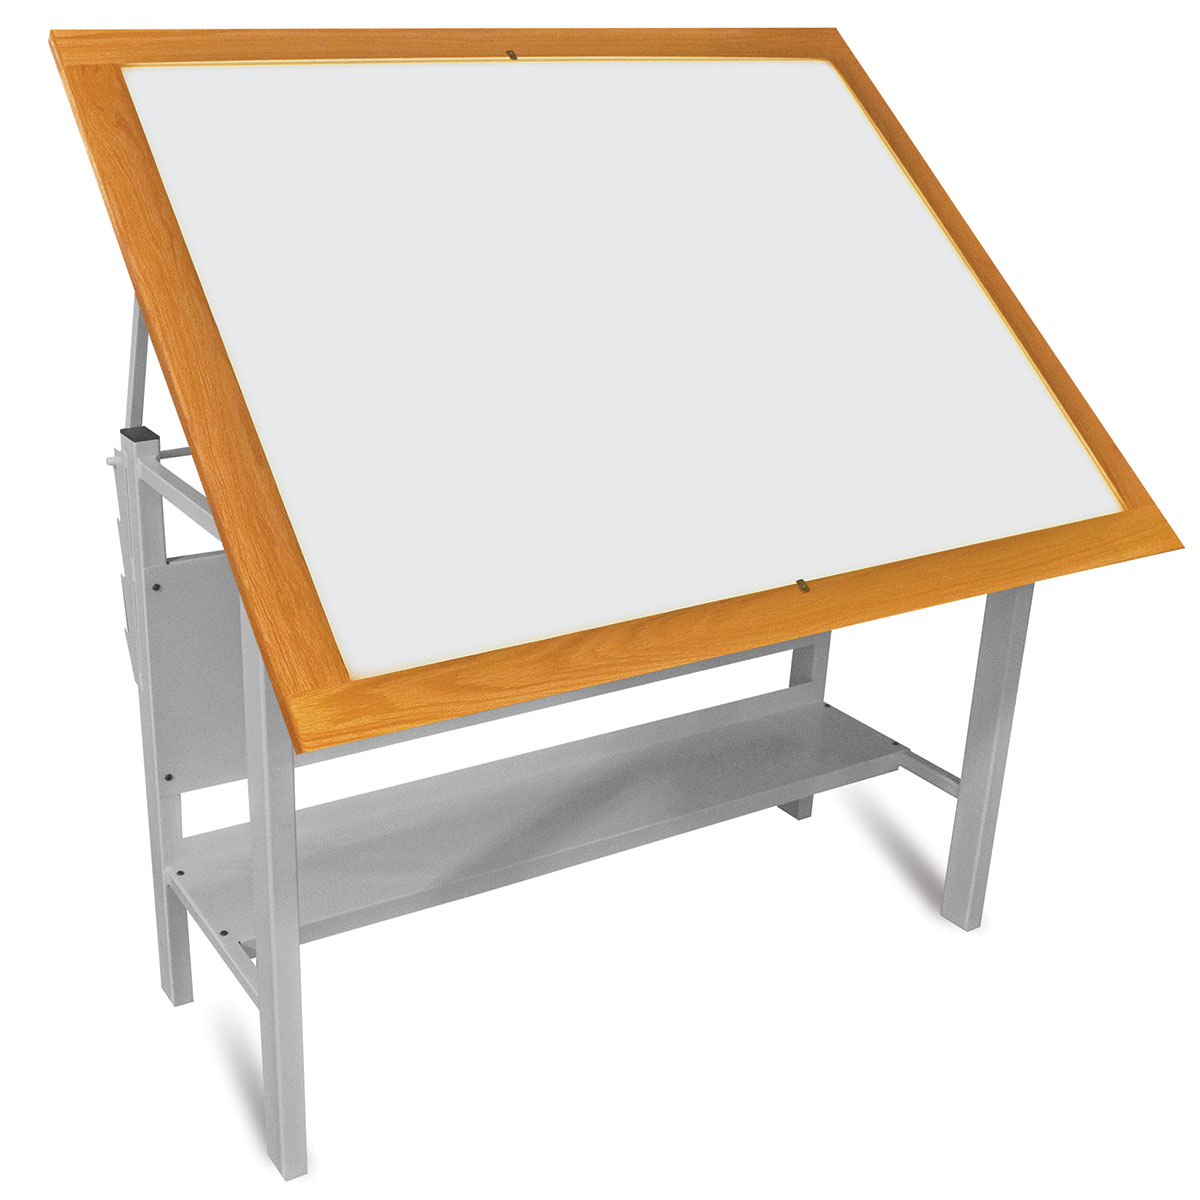 17+ Drafting Table With Light